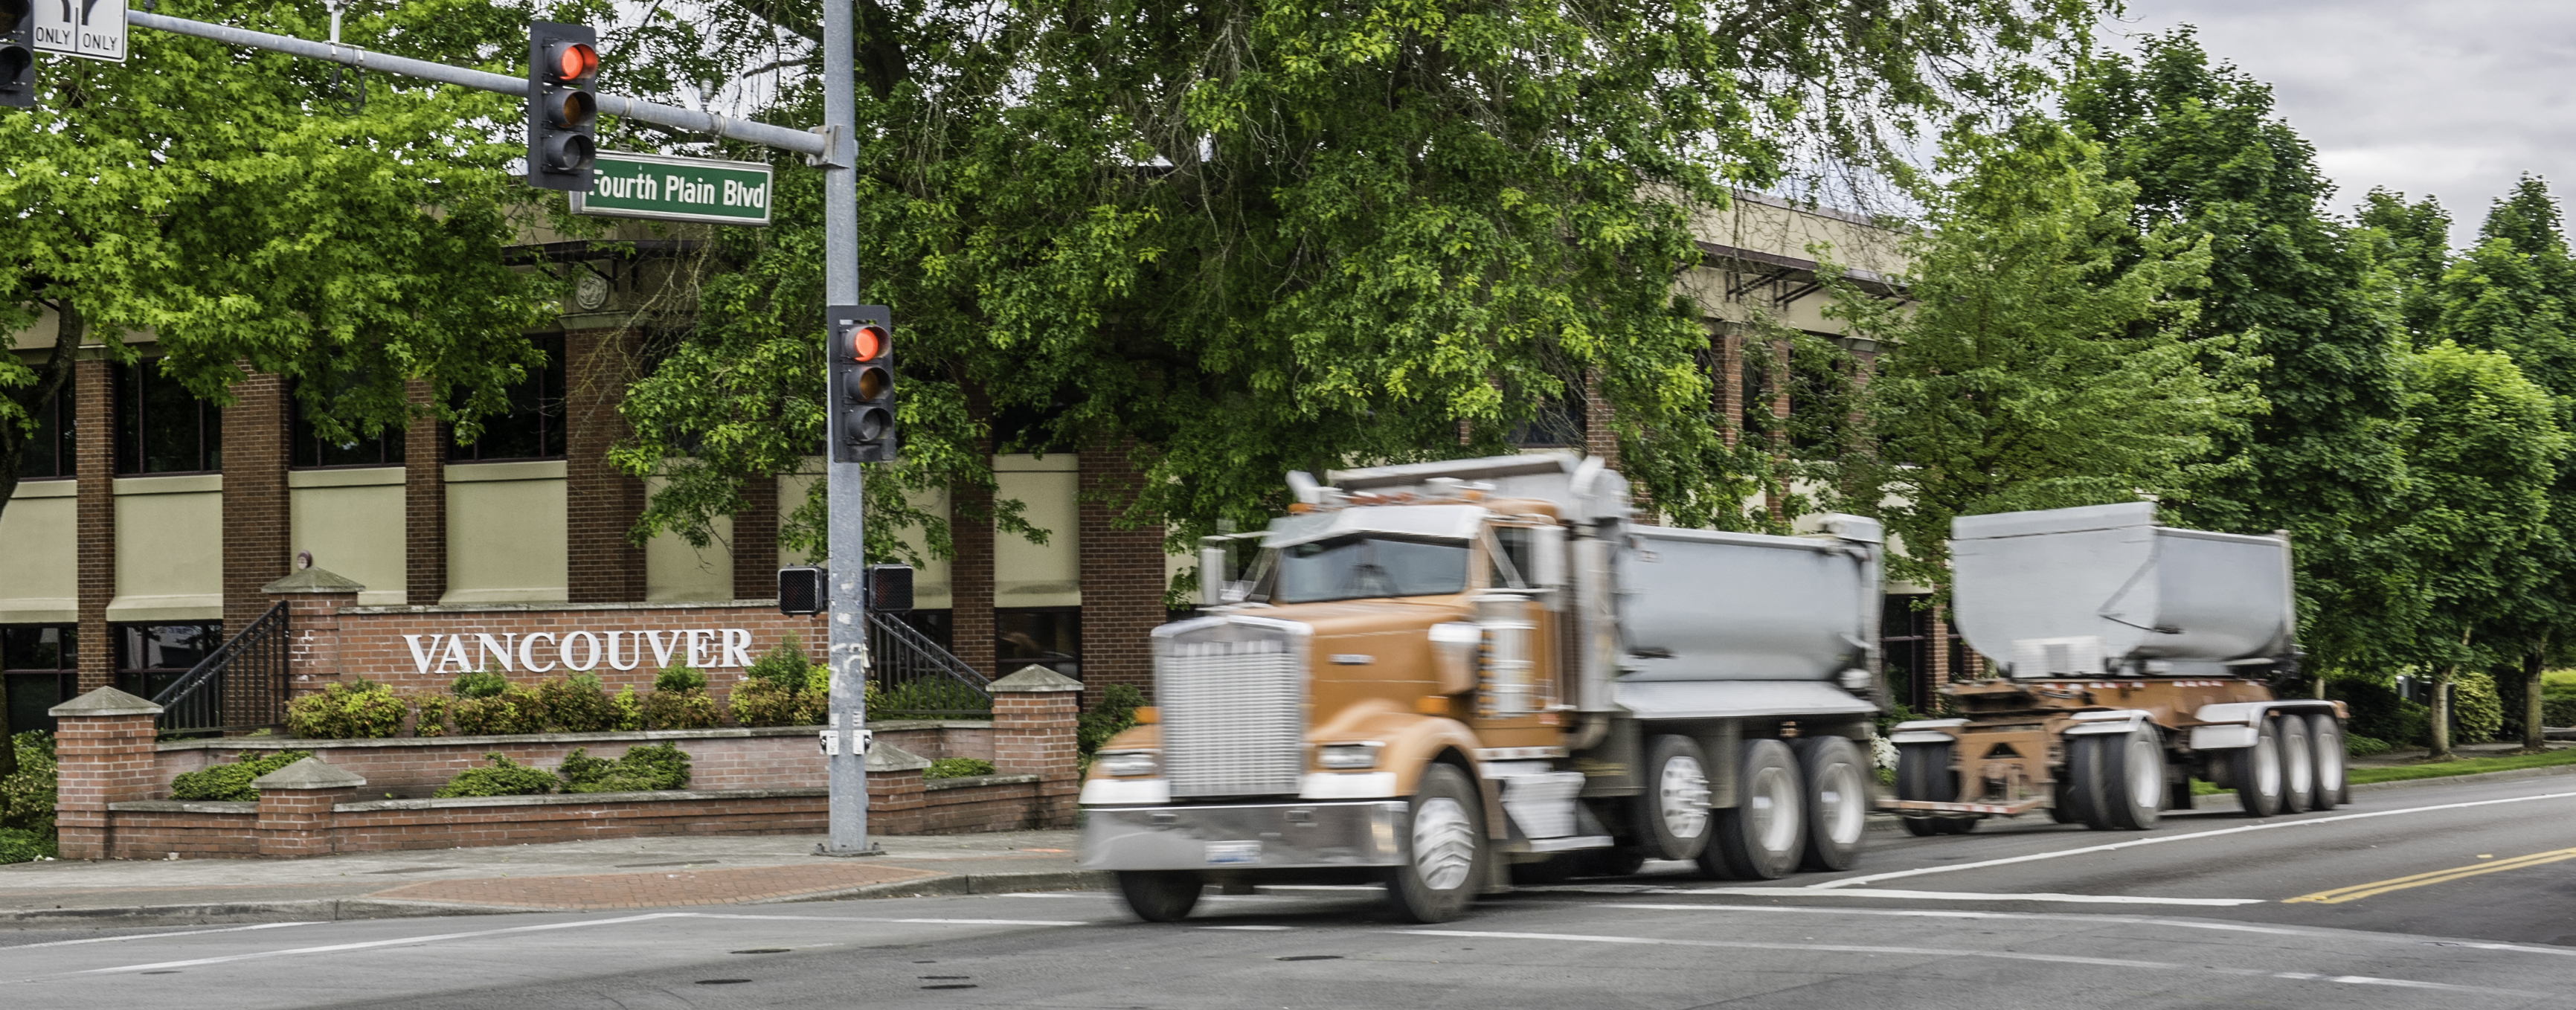 City seeks applicants with freight mobility experience for Transportation and Mobility Commission